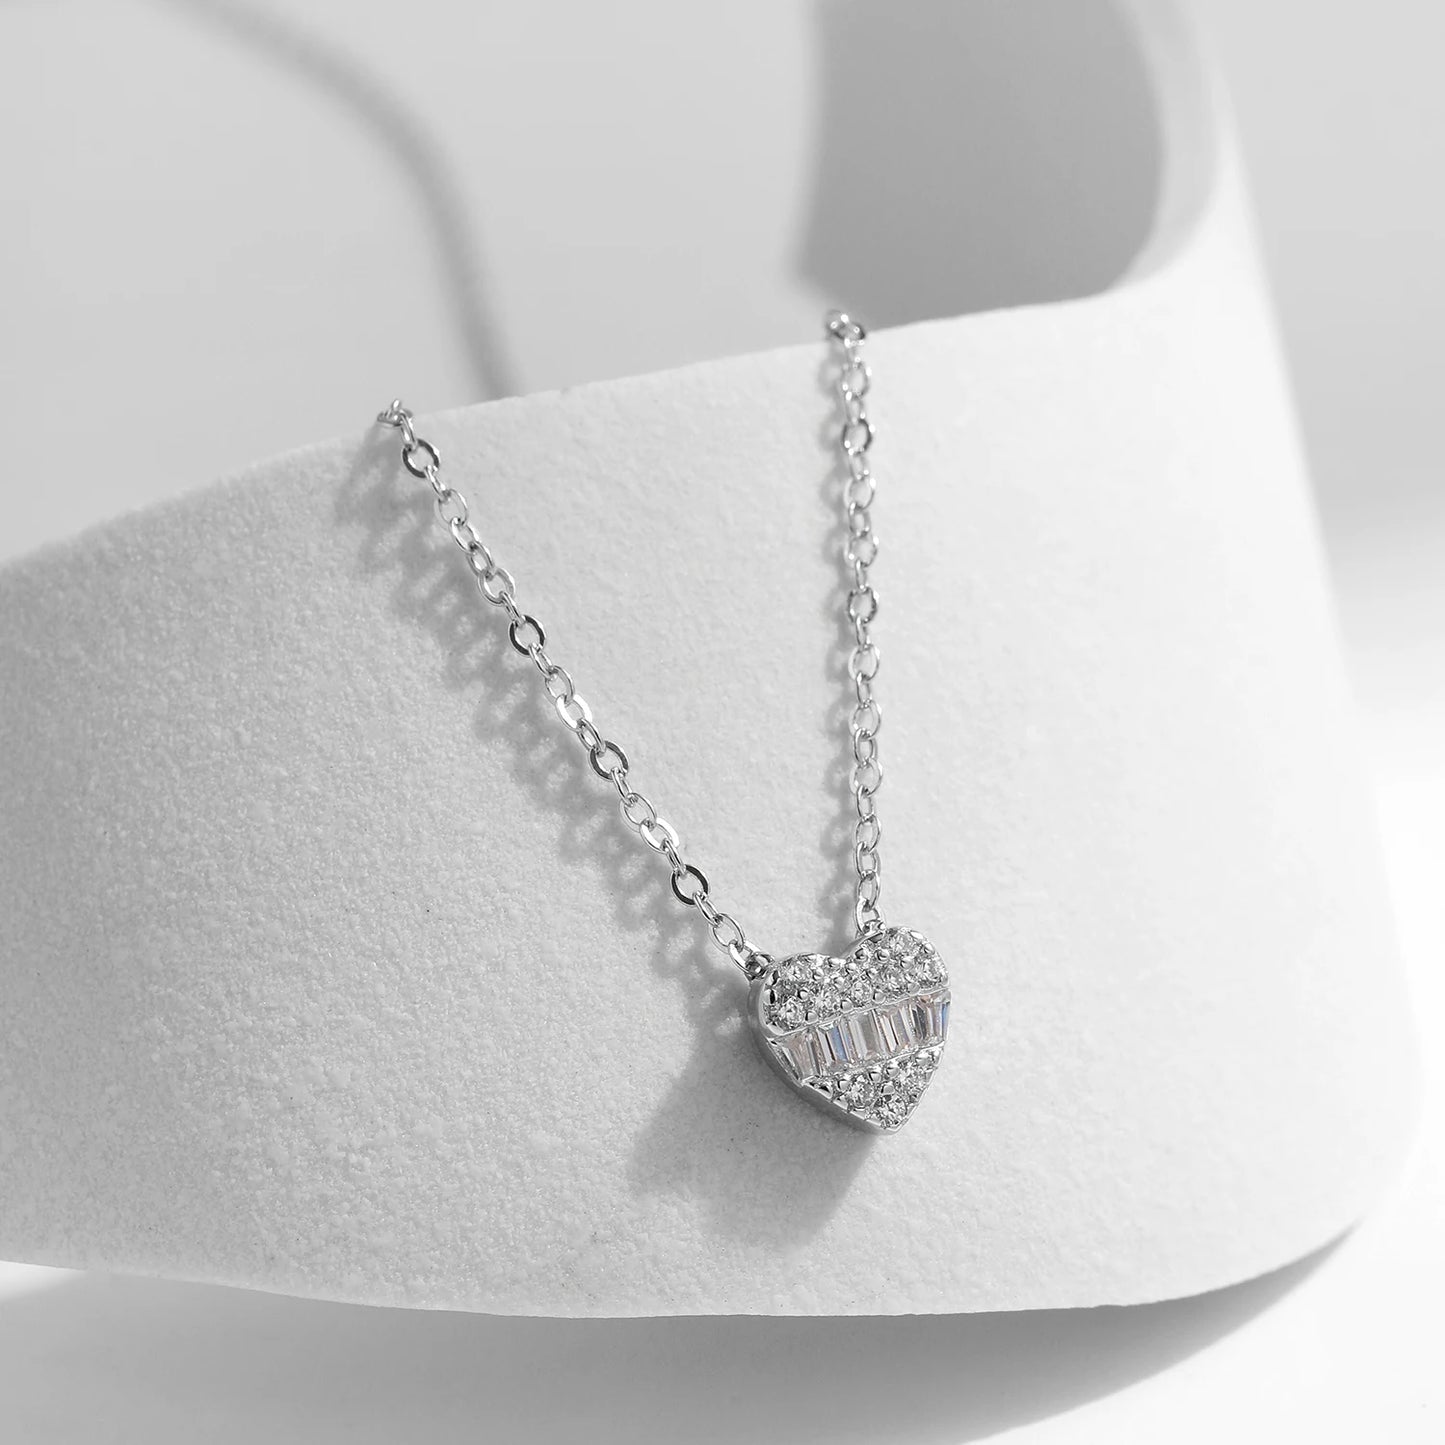 Shinning Heart Necklace